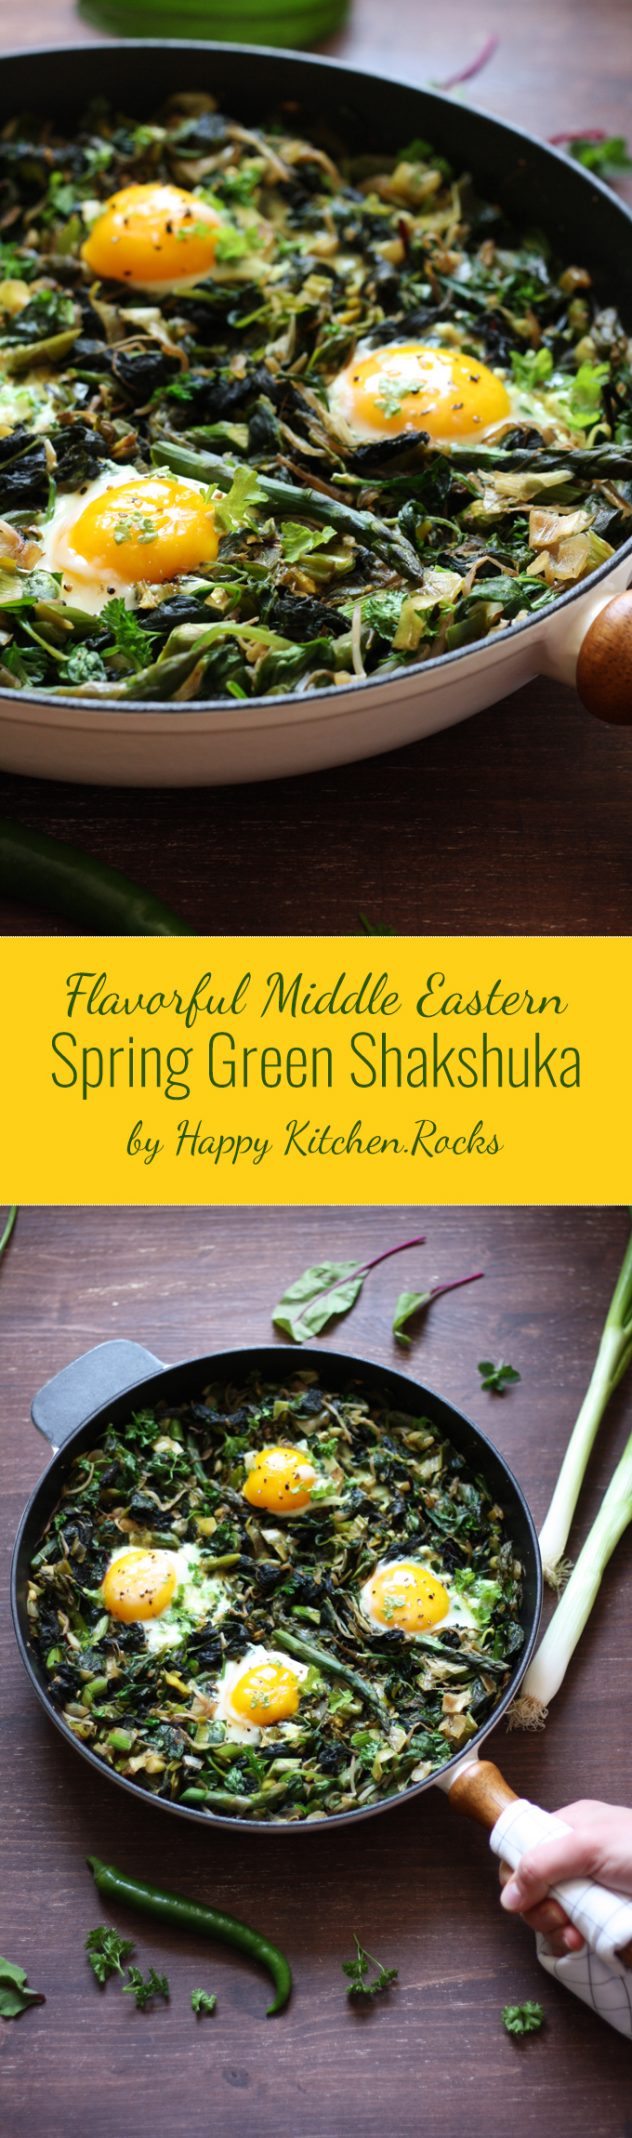 Spring Green Shakshuka is a versatile gluten-free vegetarian one-pot breakfast (or dinner) meal packed with nutrients and vitamins! Recipe ready in less than 30 minutes.